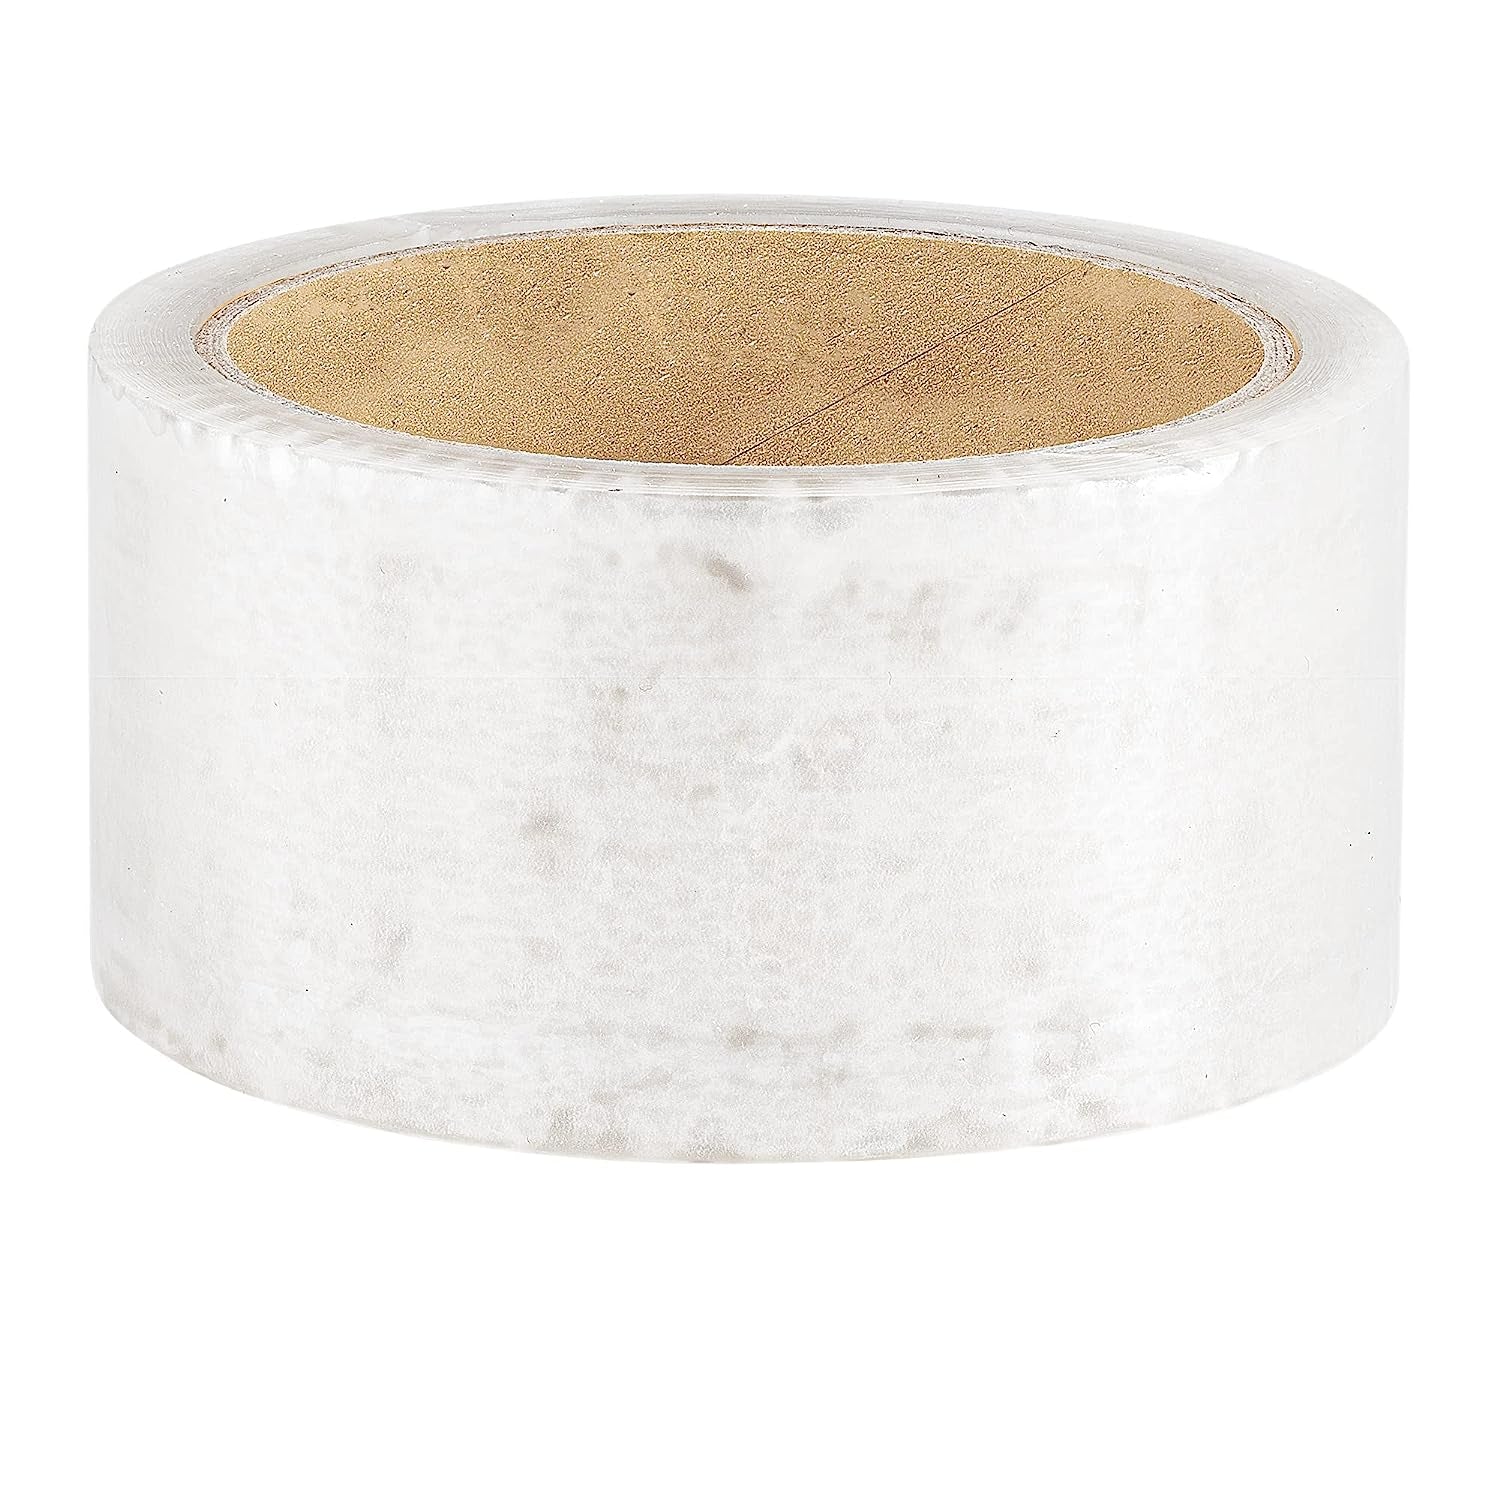 3 Pack Clear Packing Tape Rolls - 1.88 Inch Wide - Shipping Tape for Moving 